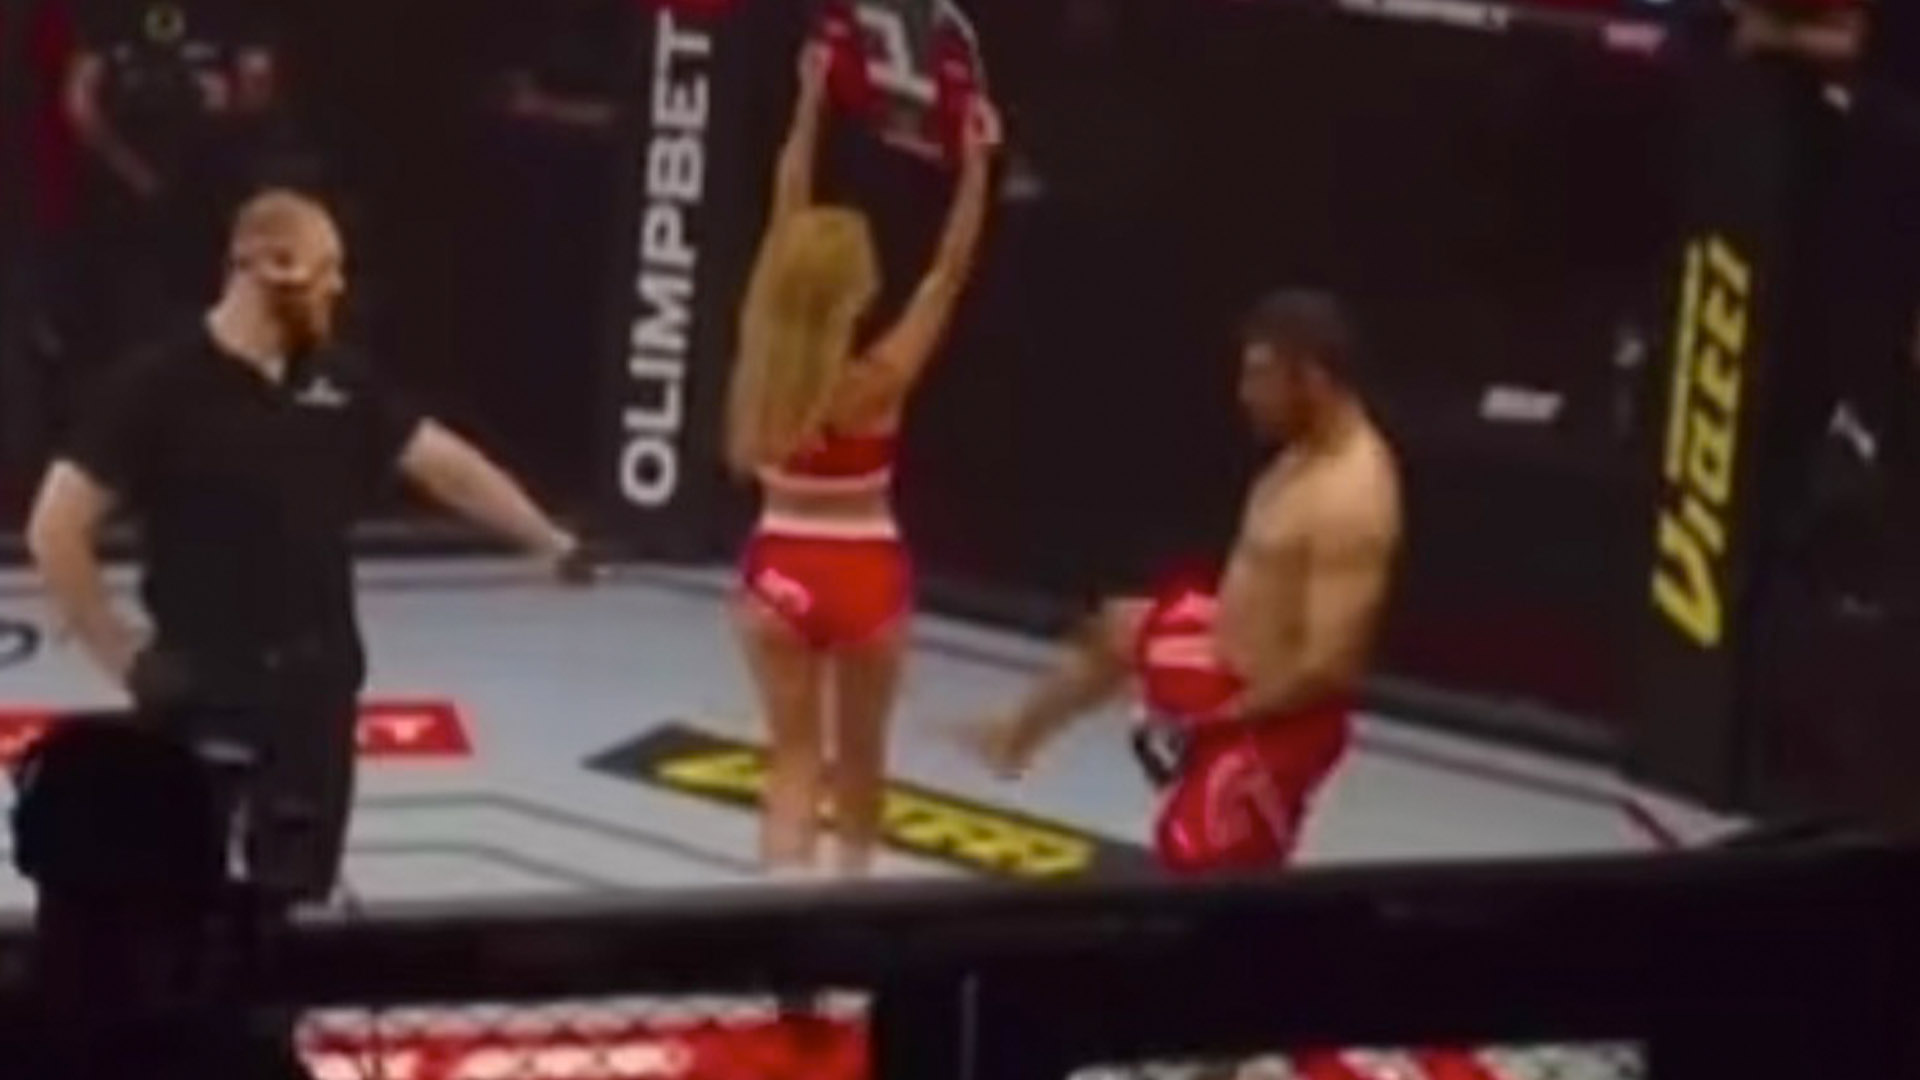 MMA fighter banned for life for kicking RING GIRL – before being attacked by crowd members after knockout loss [Video]